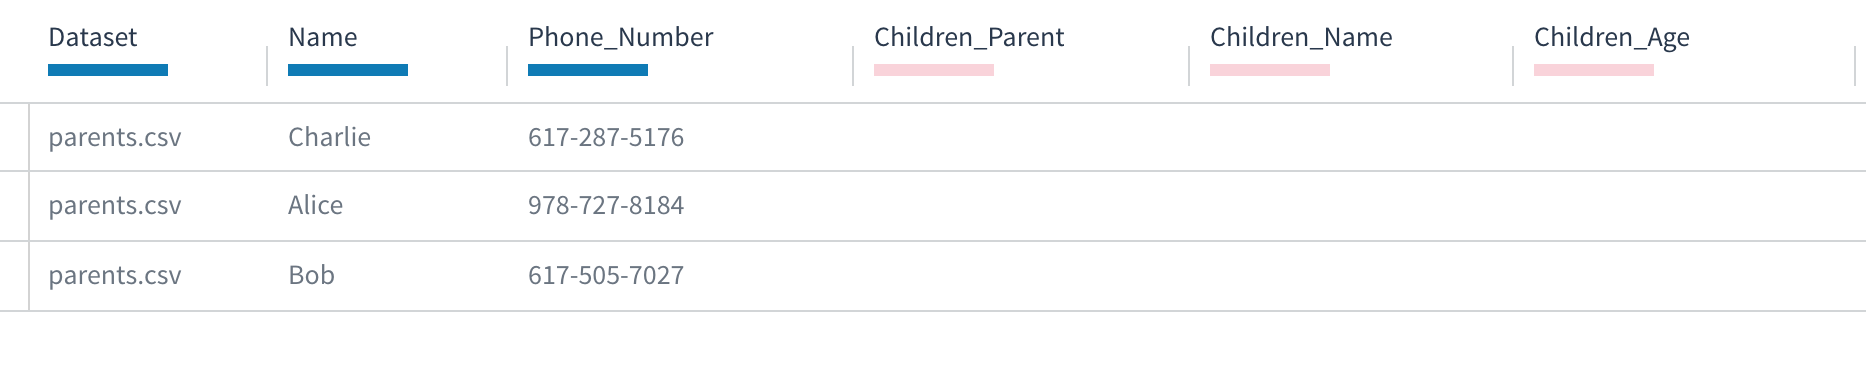 The Children_Parent, Children_Name, and Children_Age attributes are 100% empty, while the Dataset, Name, and Phone_Number attributes are 100% populated.